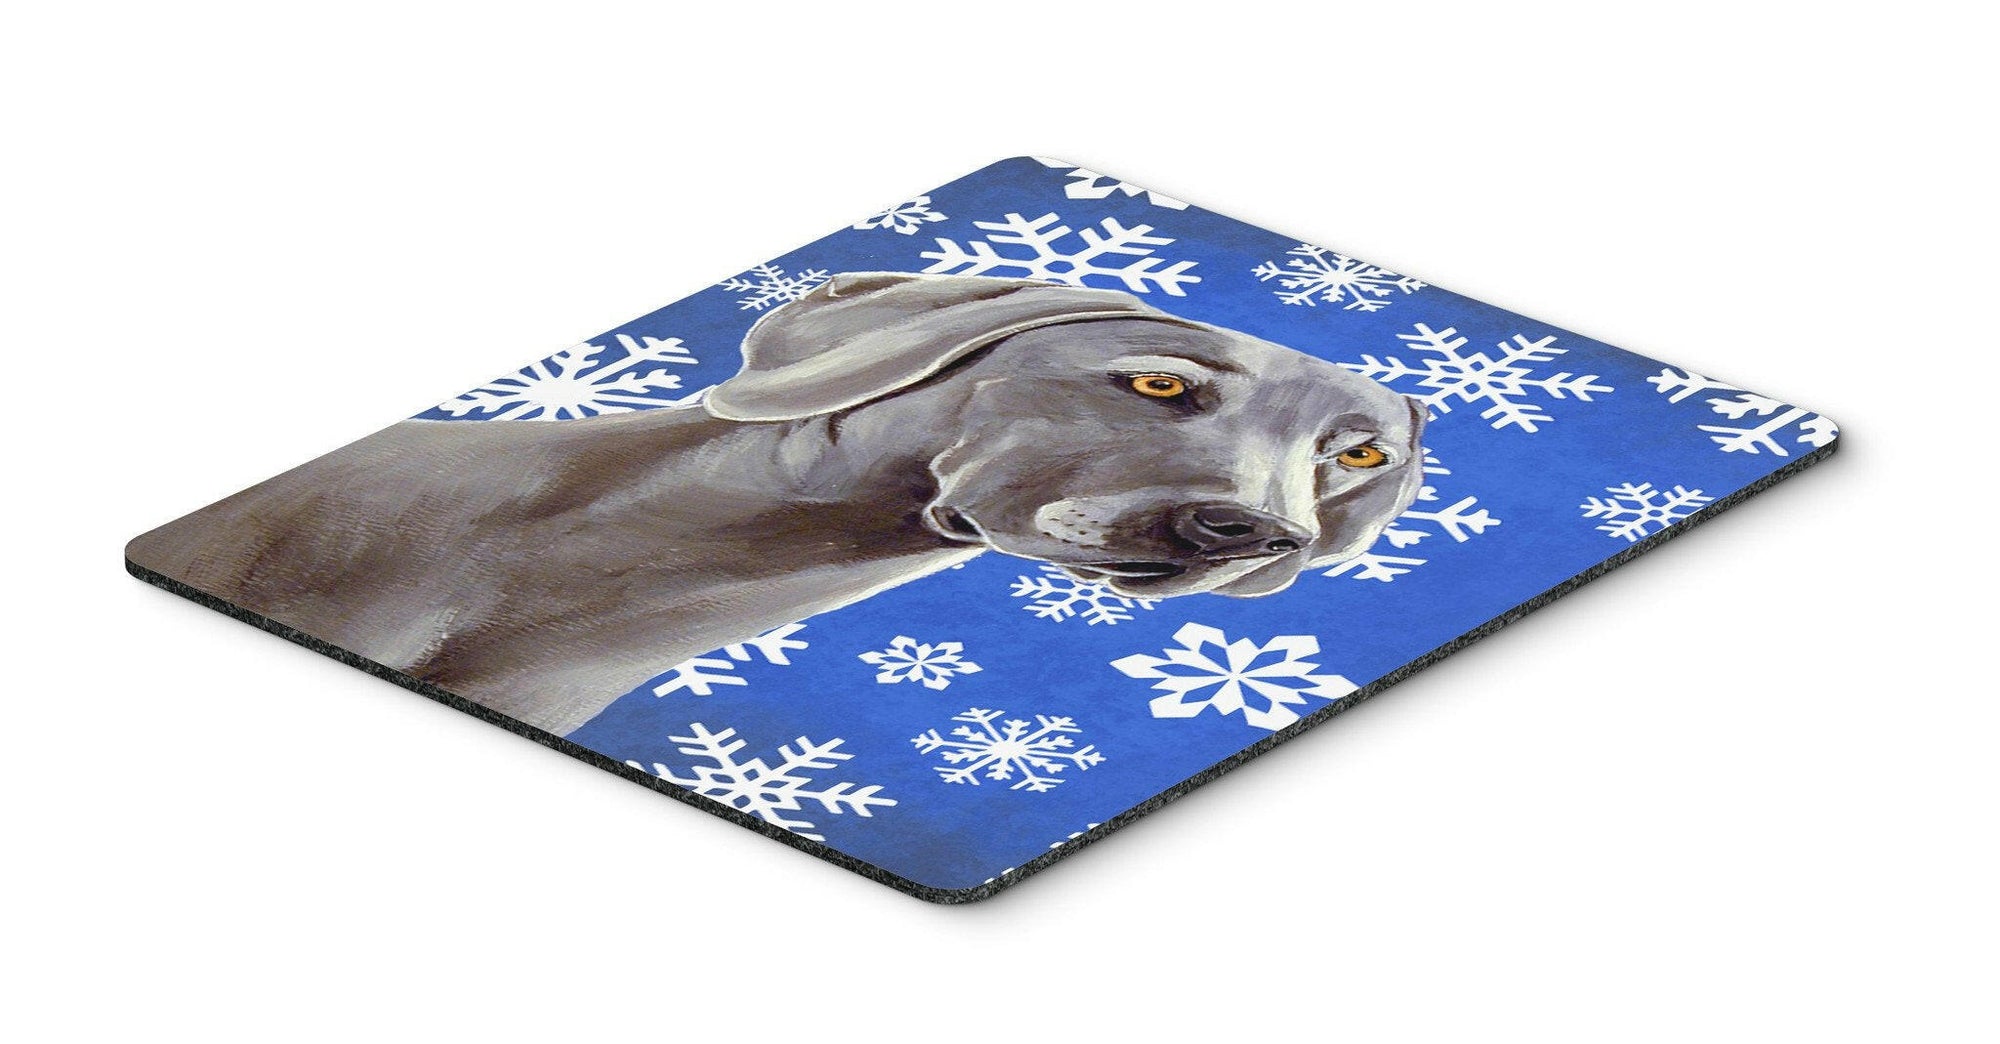 Weimaraner Winter Snowflakes Holiday Mouse Pad, Hot Pad or Trivet by Caroline's Treasures